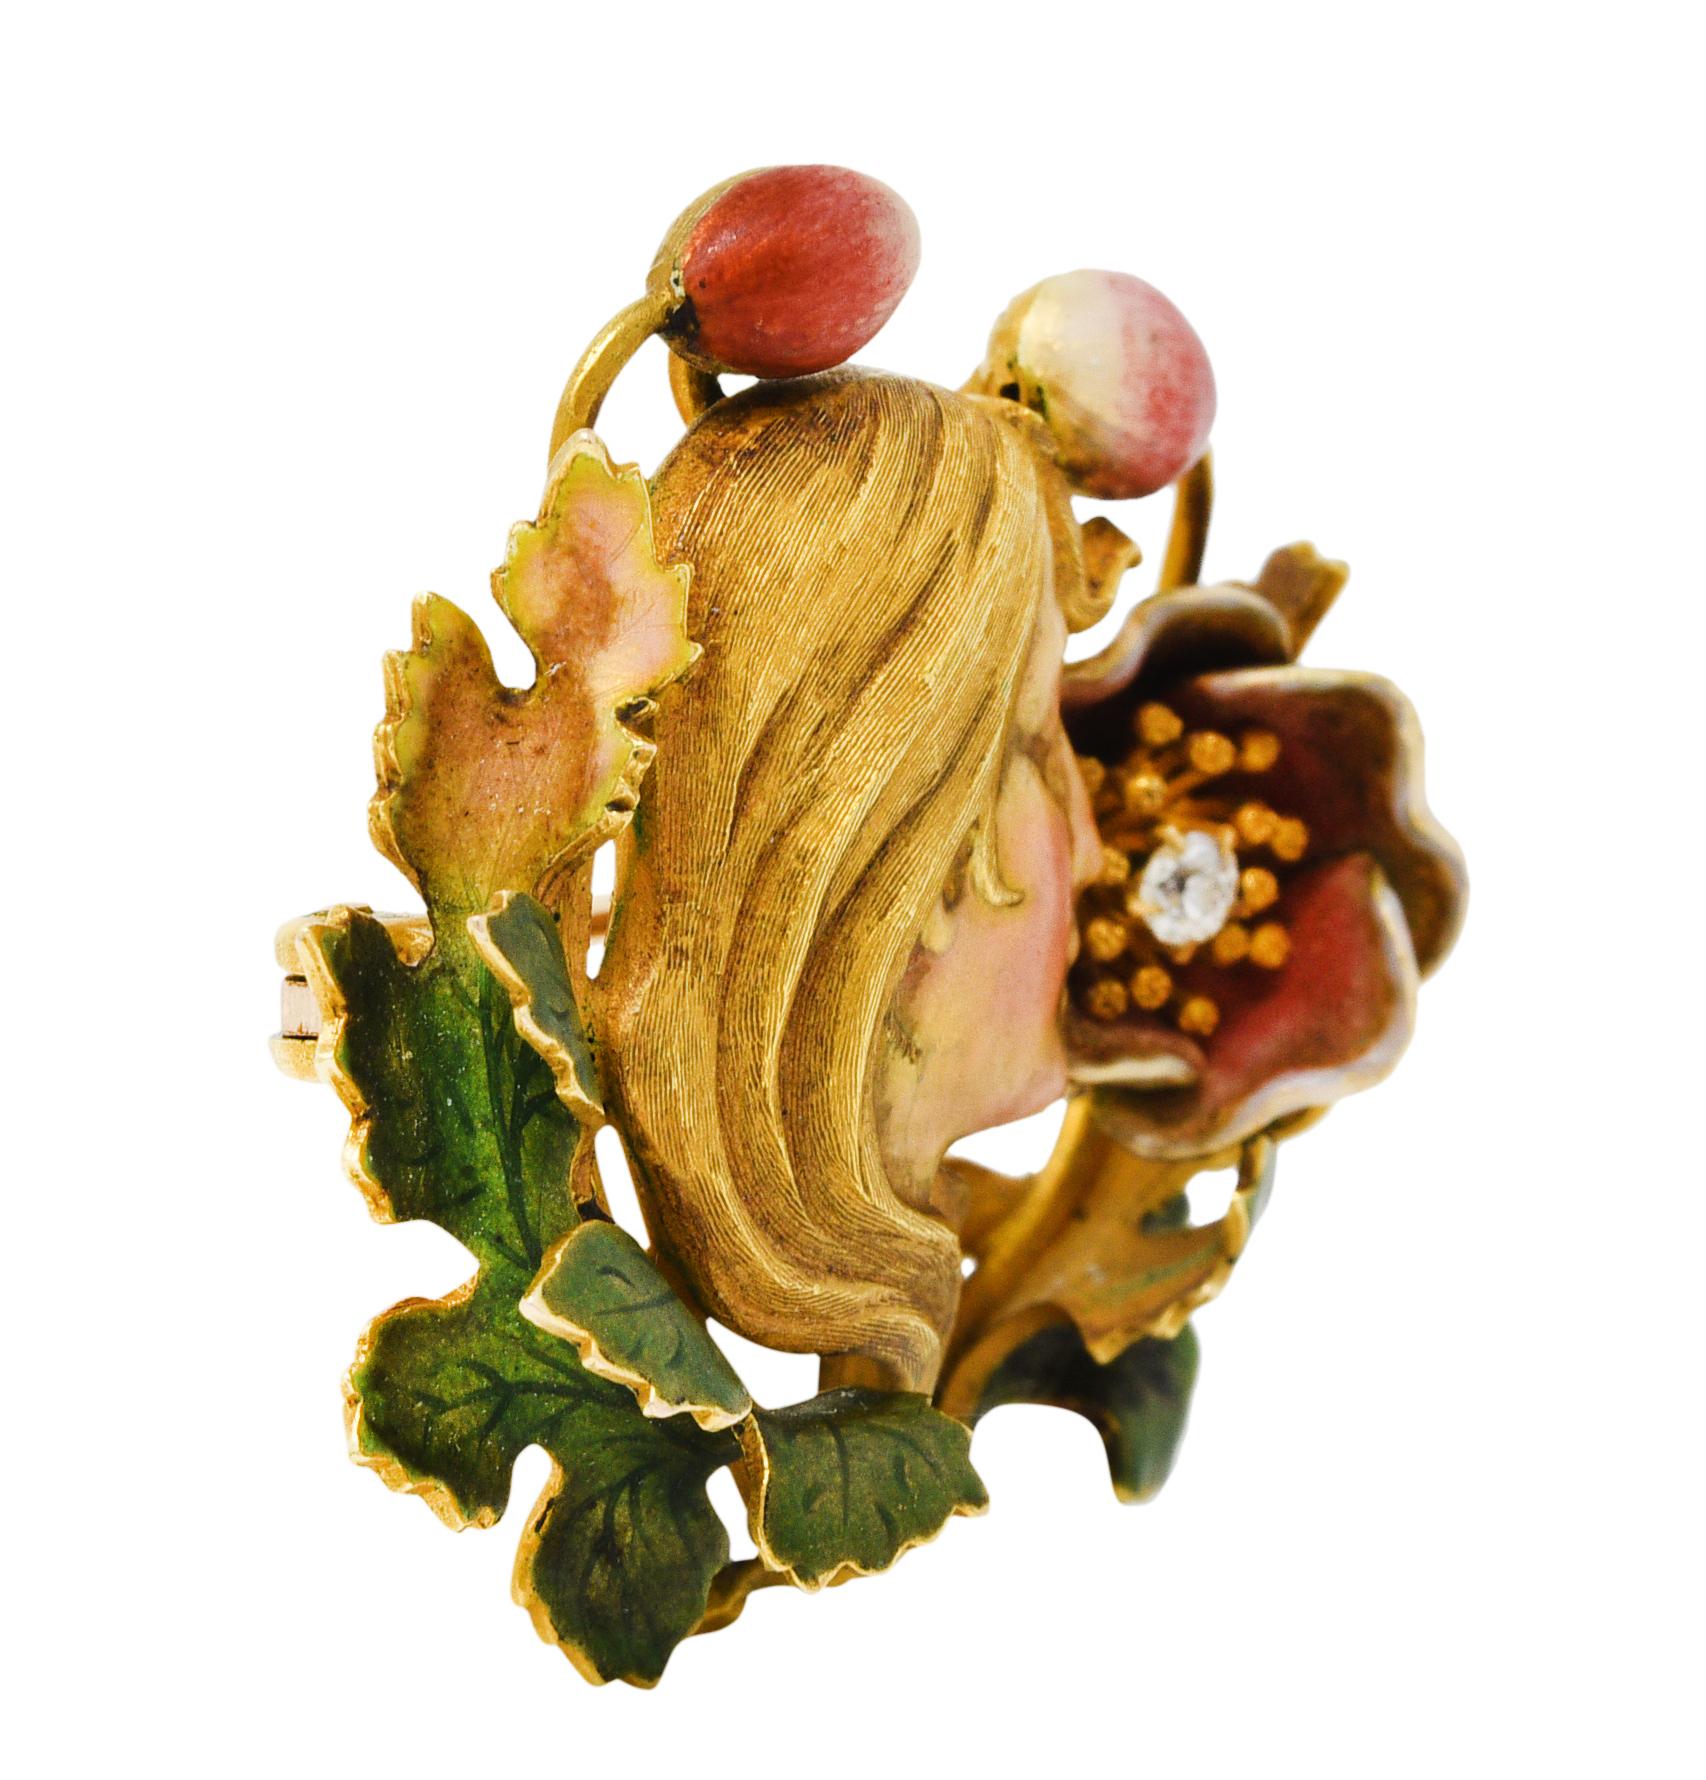 Highly dimensional brooch depicts a woman smelling a blooming flower

Woman features a highly rendered profile with textured windswept hair

Face is glossed with iridescent enamel - blushed at cheeks

Florals and foliate are colored by matte enamel